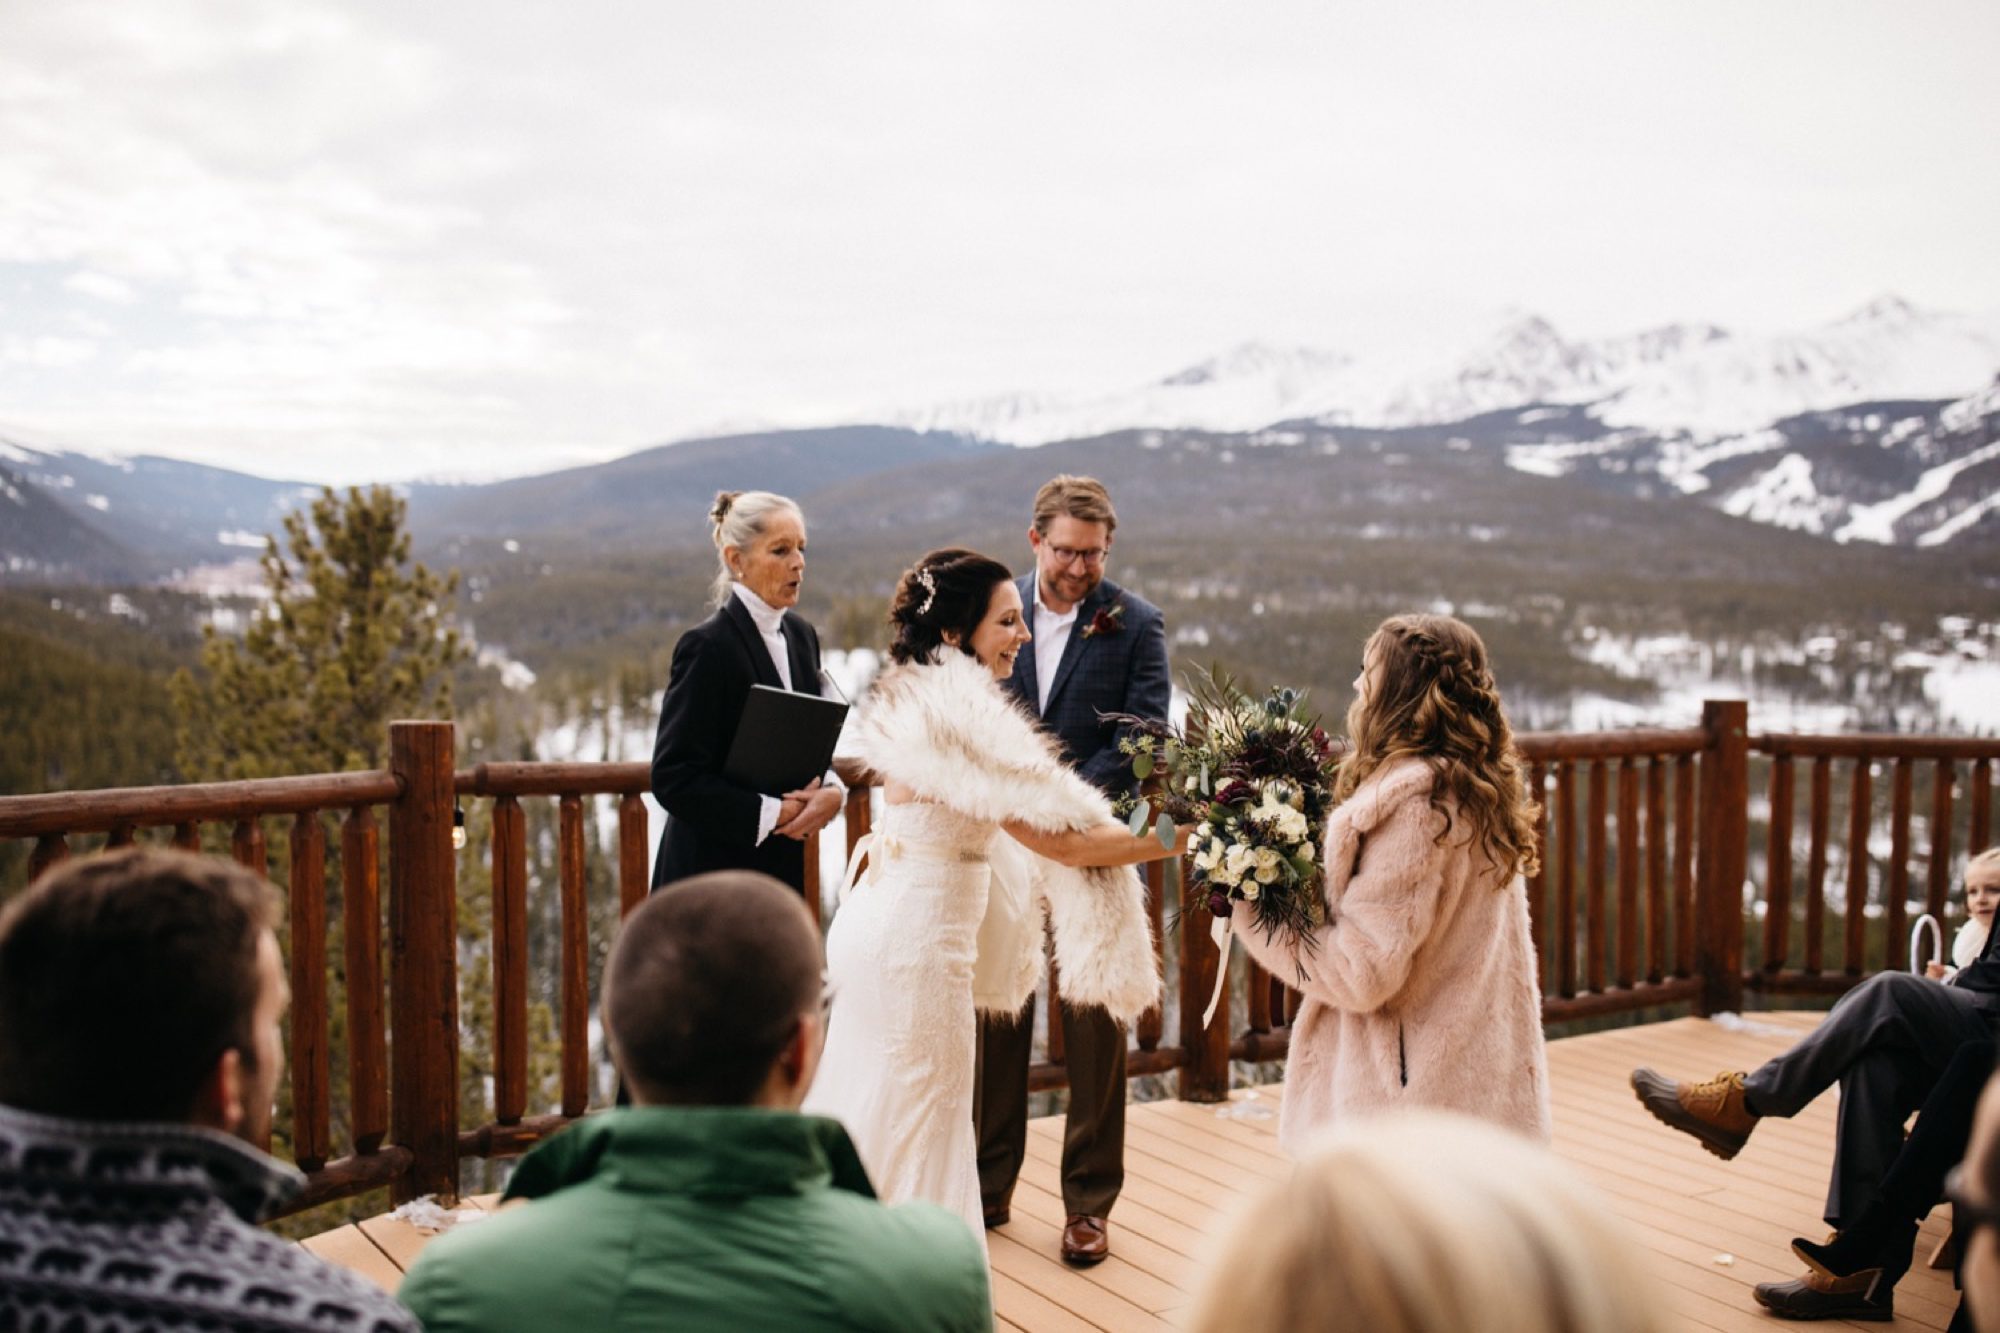 The Lodge at Breckenridge, Breckenridge Colorado Elopement Photographer, Places to Elope in Colorado, Colorado Elopement Locations, Colorado Adventure Elopement, Breckenridge Elopement Photographer, Colorado Mountain Elopement, Colorado Wedding Photographer, Breckenridge Wedding Photographer, Boreas Pass Breckenridge Colorado, Boreas Pass Colorado Elopement, Adventure Elopement, Adventure Wedding, Intimate Wedding, Places to Elope, Winter Wedding, Winter Elopement, Winter wedding ceremony